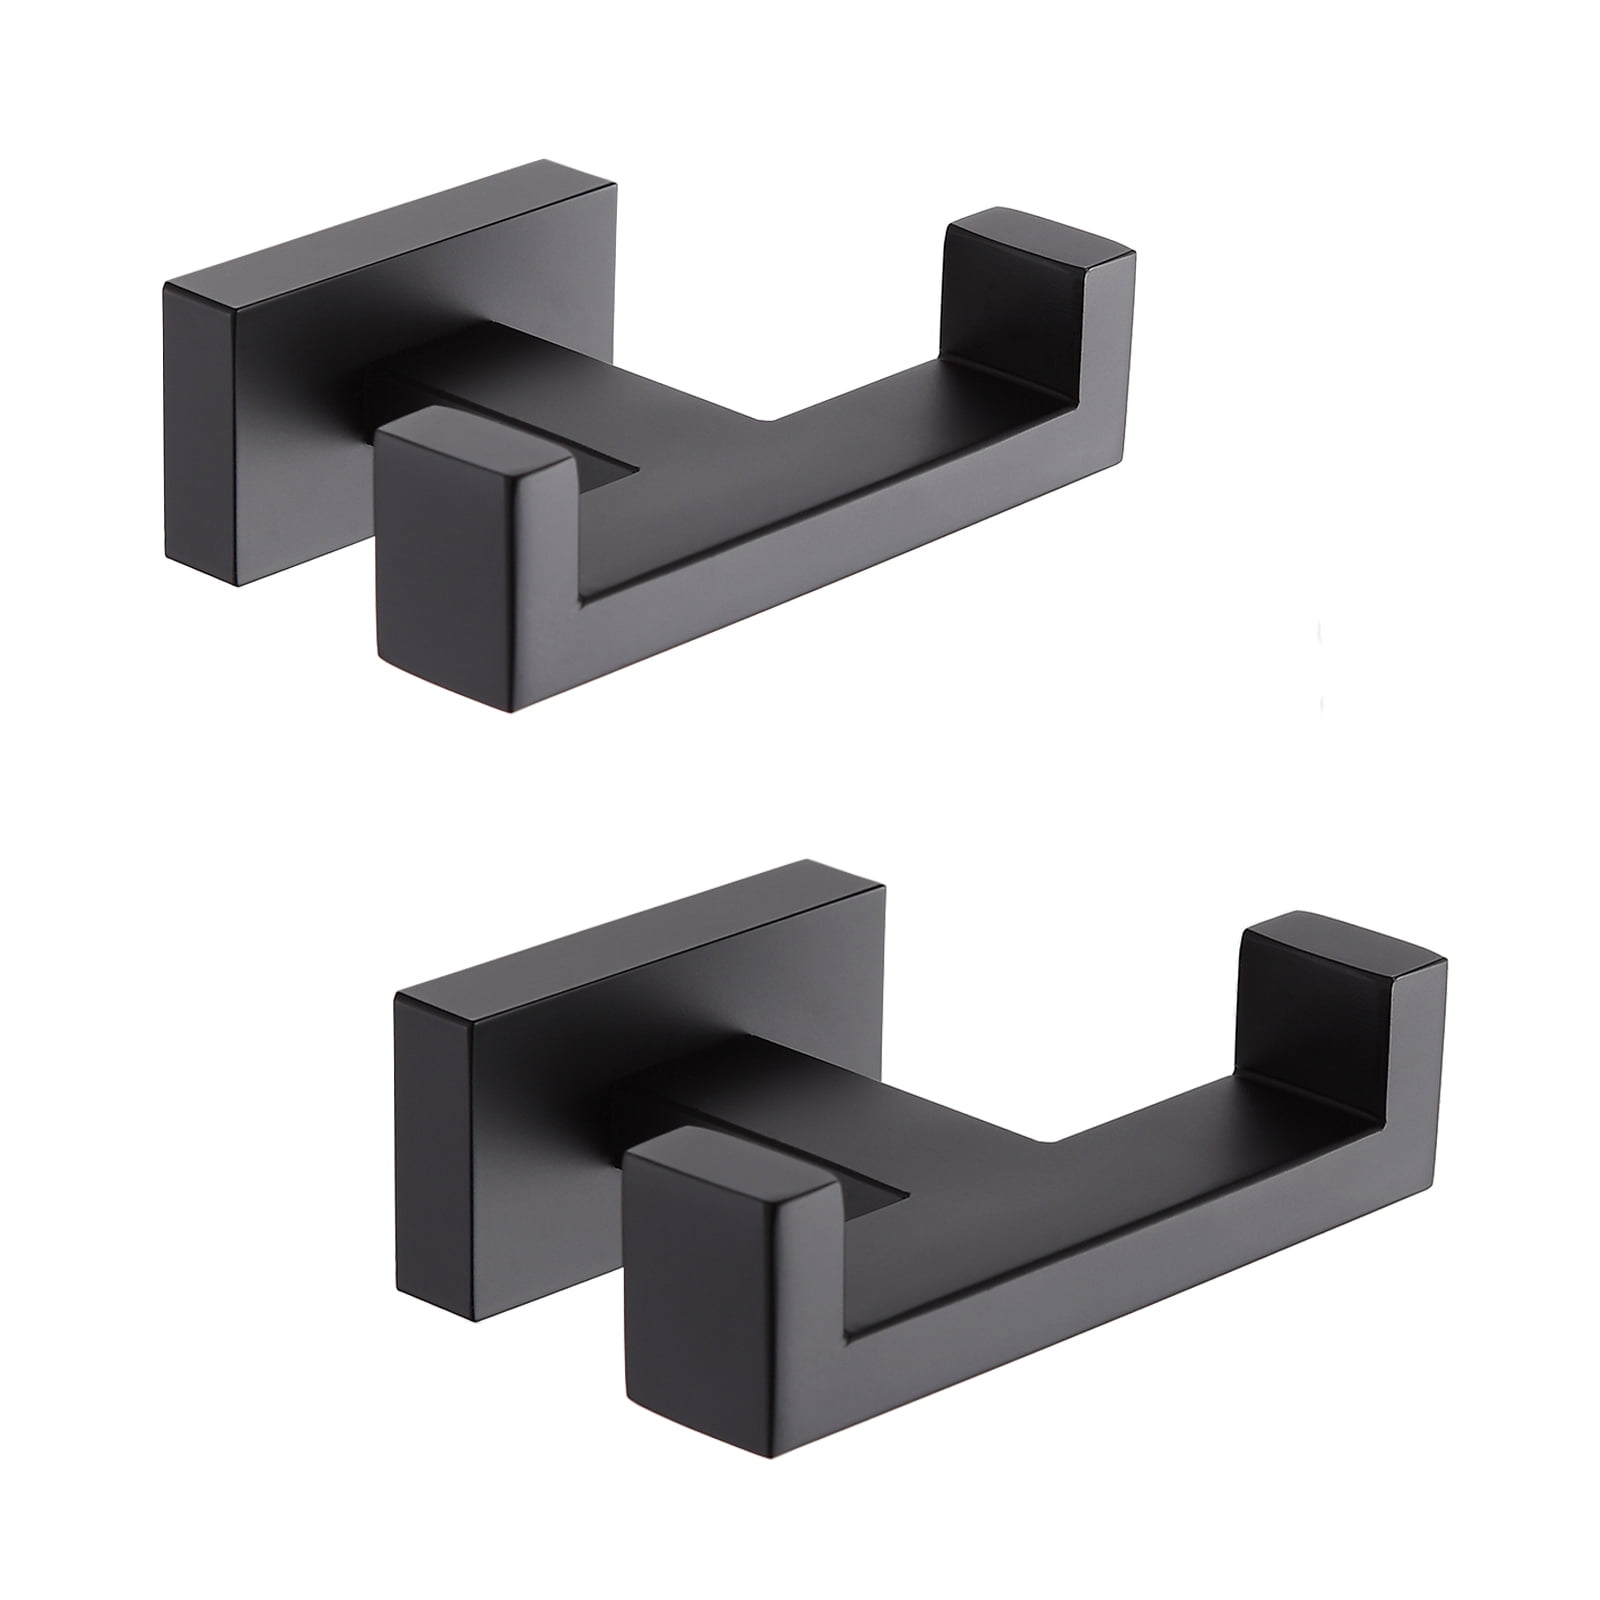  3 Pack Double Towel Hooks for Bathroom Matte Black Wall Mount Robe  Hook Towel Holder for Kitchen Bathroom Hallway Toilet Pool for Hanging  Towels, Robe, Coat, Clothes,Bags, Sponges : Tools 